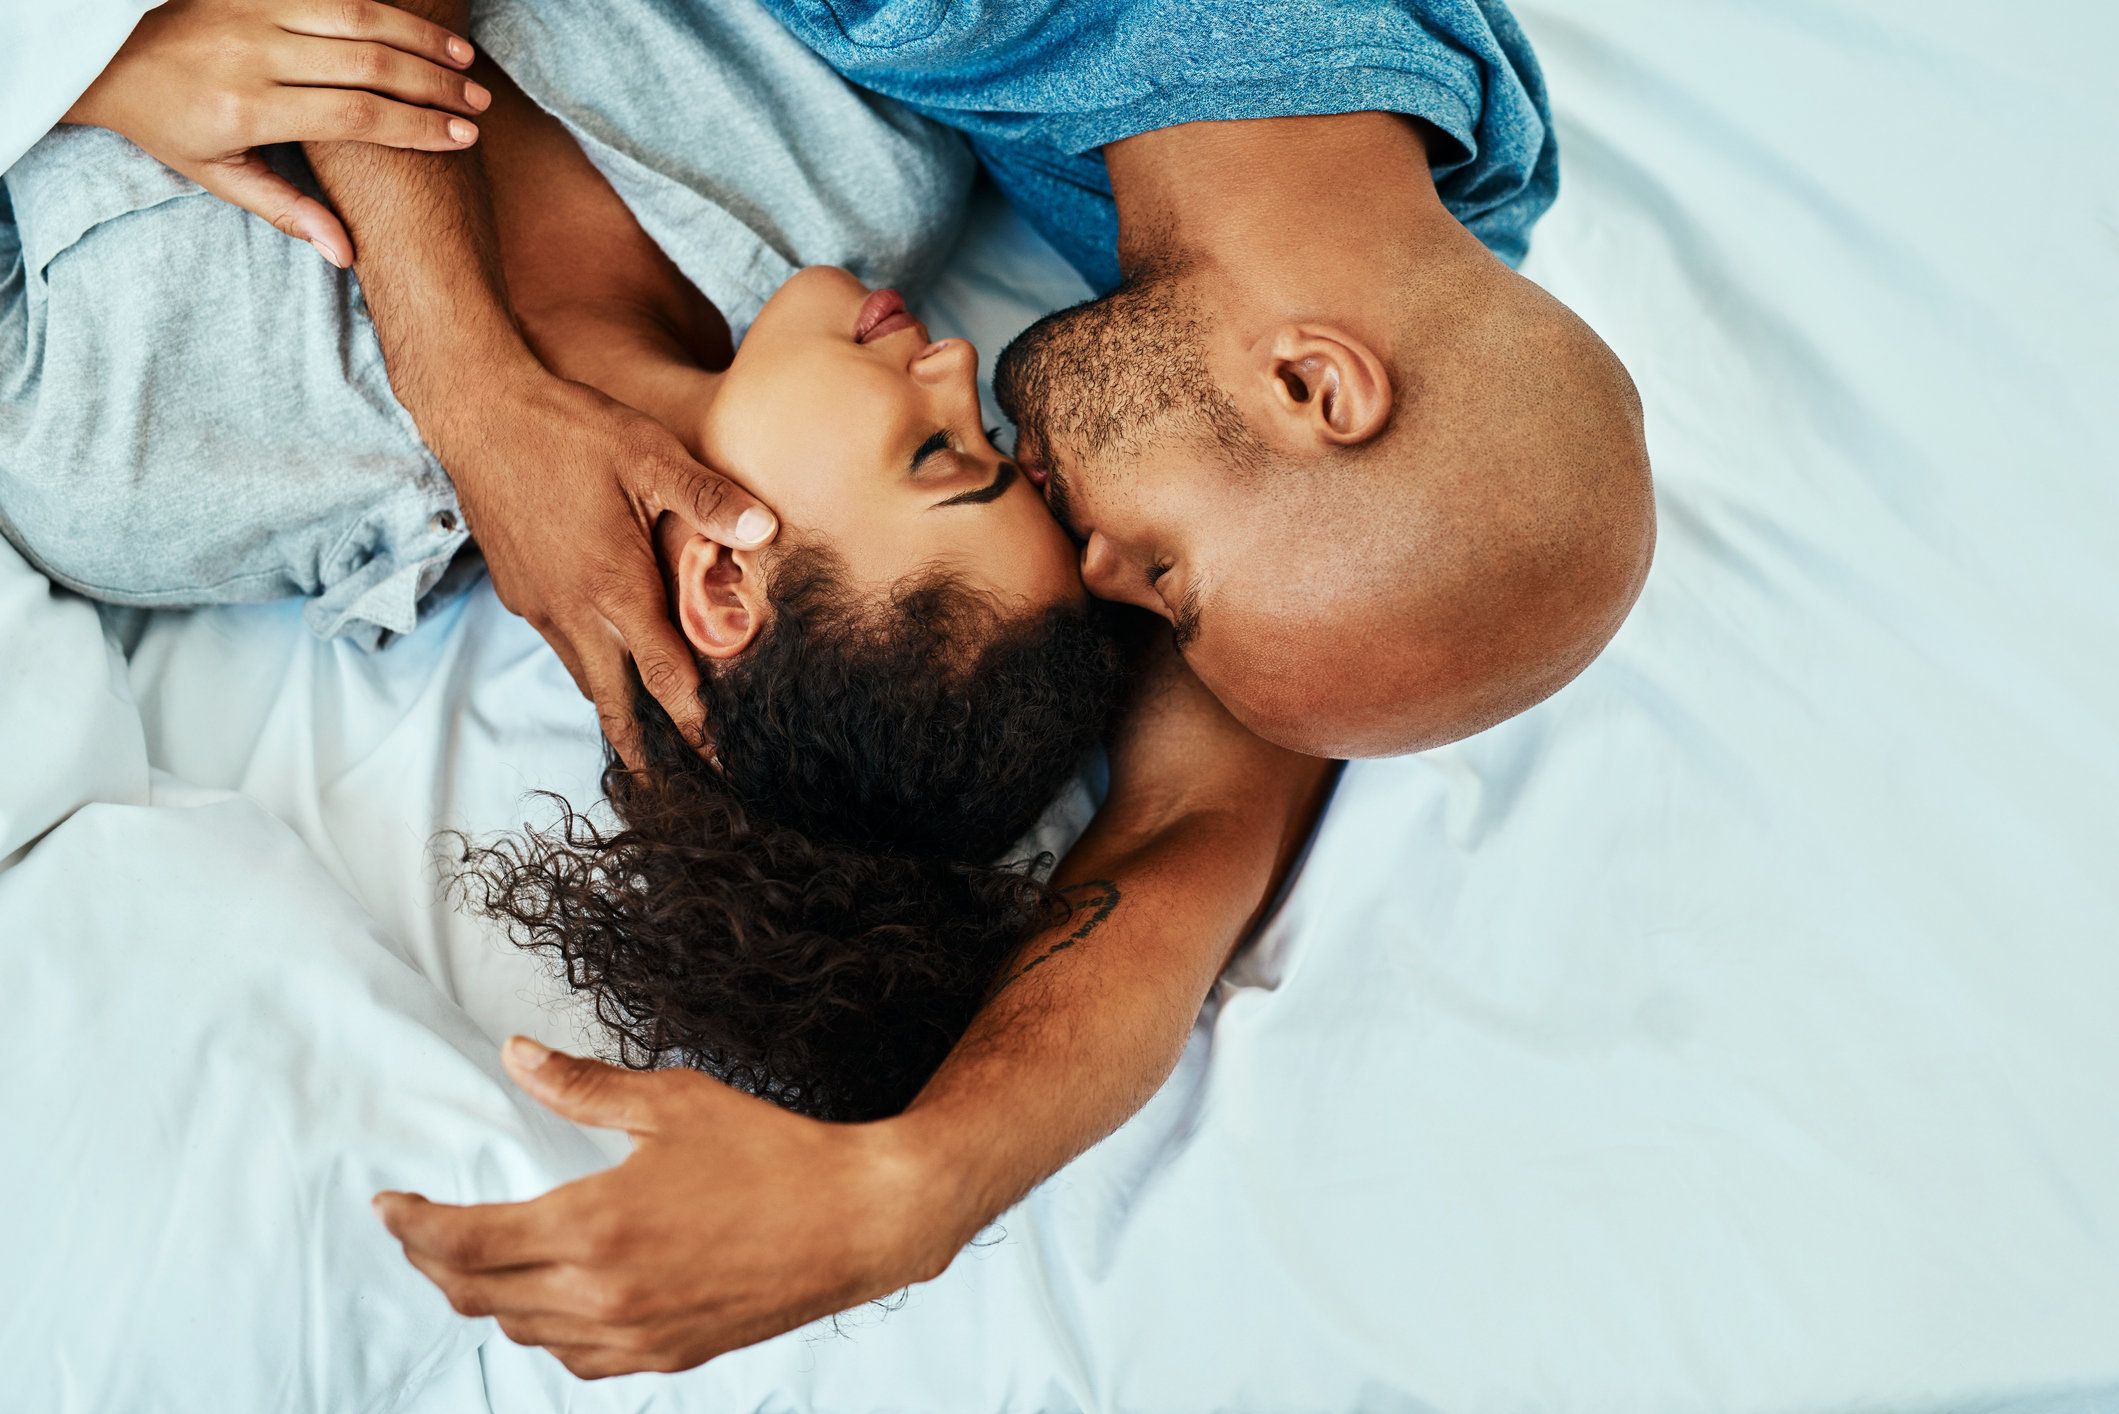 10 Married Couples Share The Keys To Their Totally Off-The-Chain Sex Life